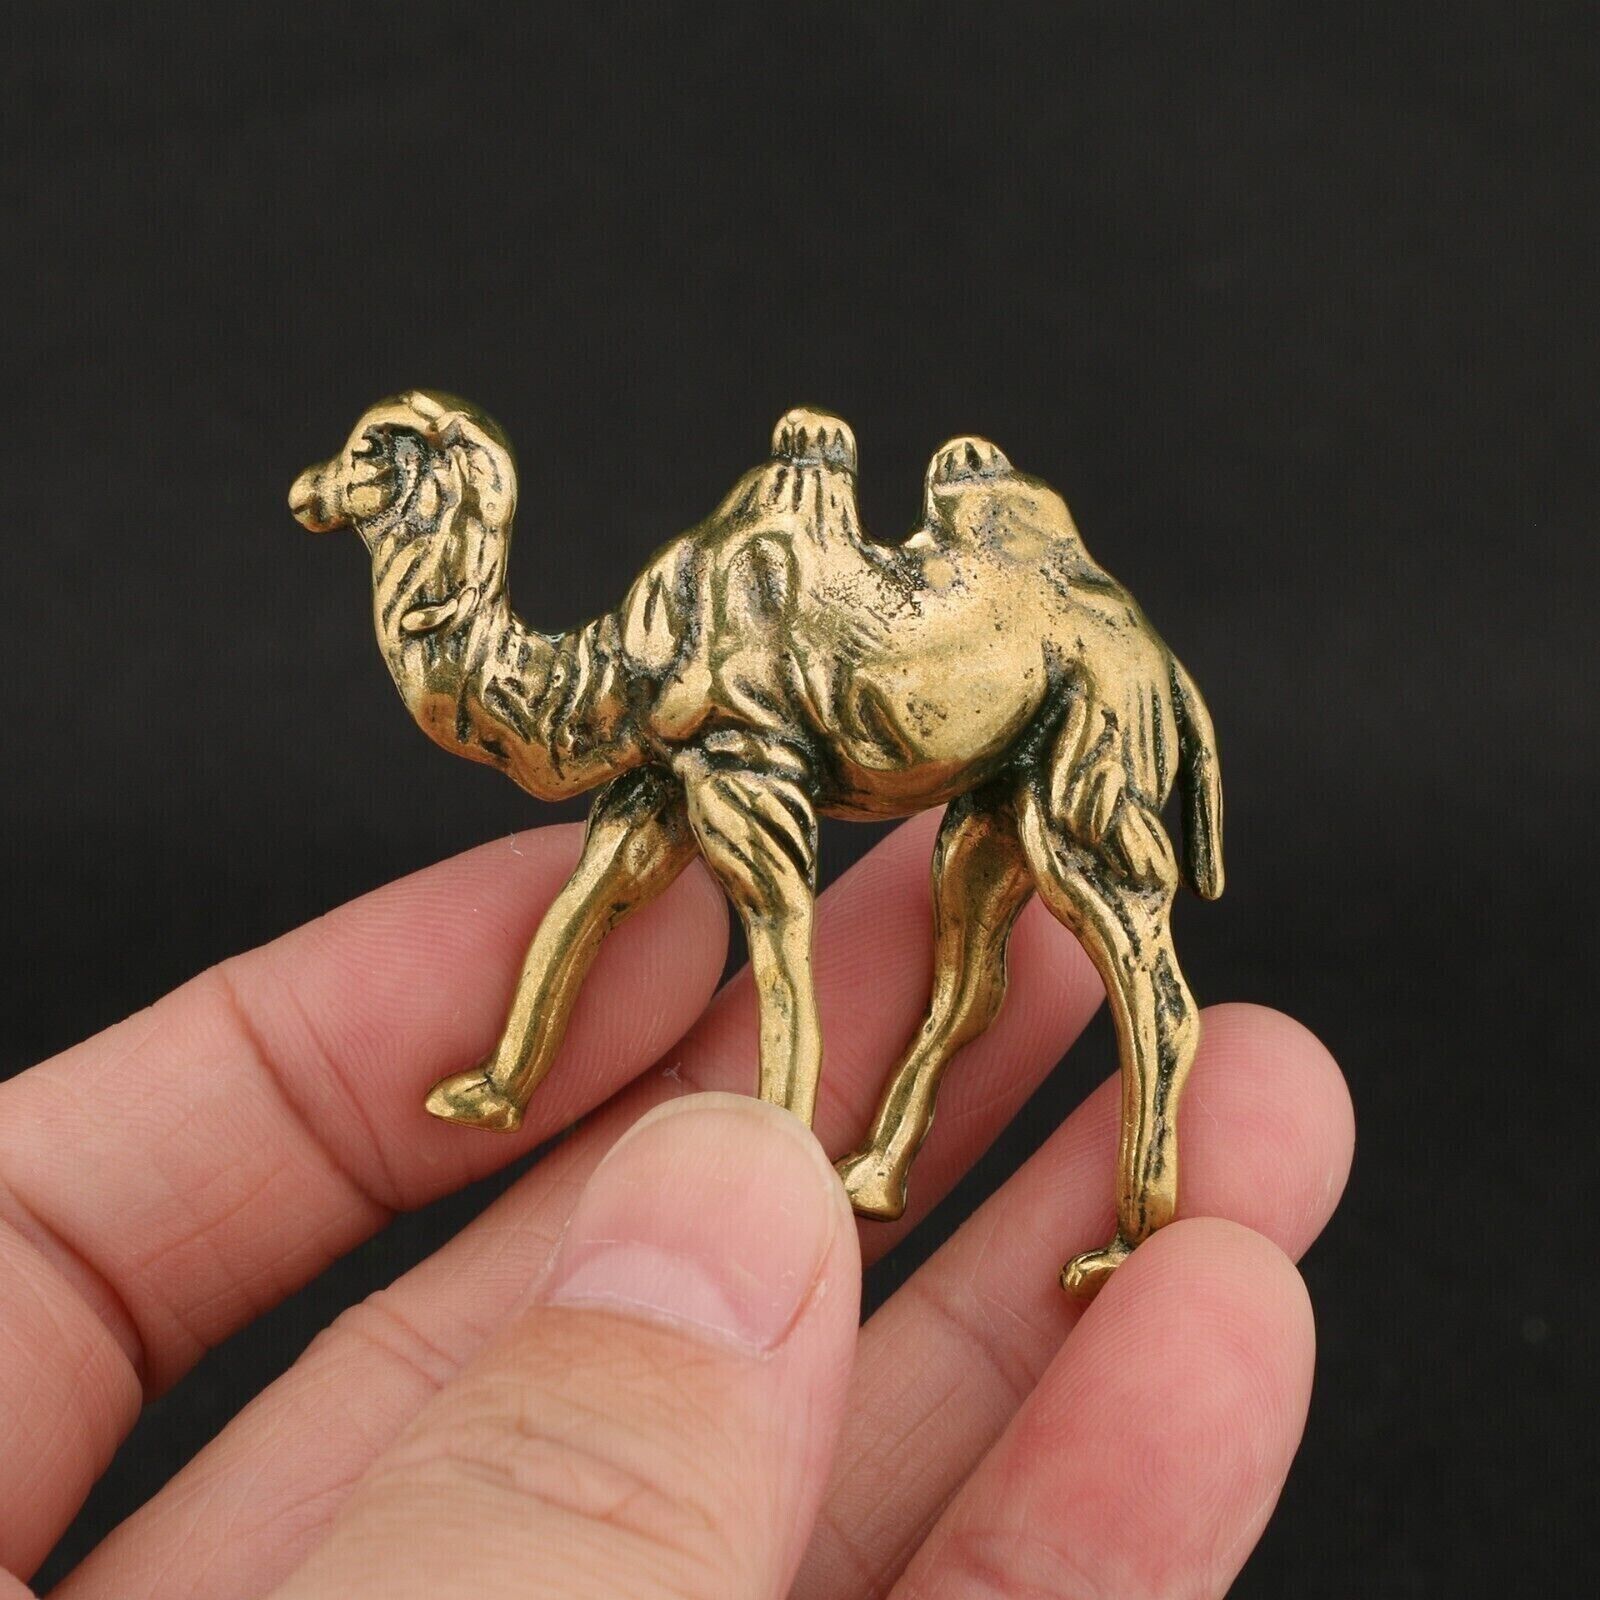 Solid Brass Camel Figurine Small Statue Home Ornaments Animal Figurines Gift